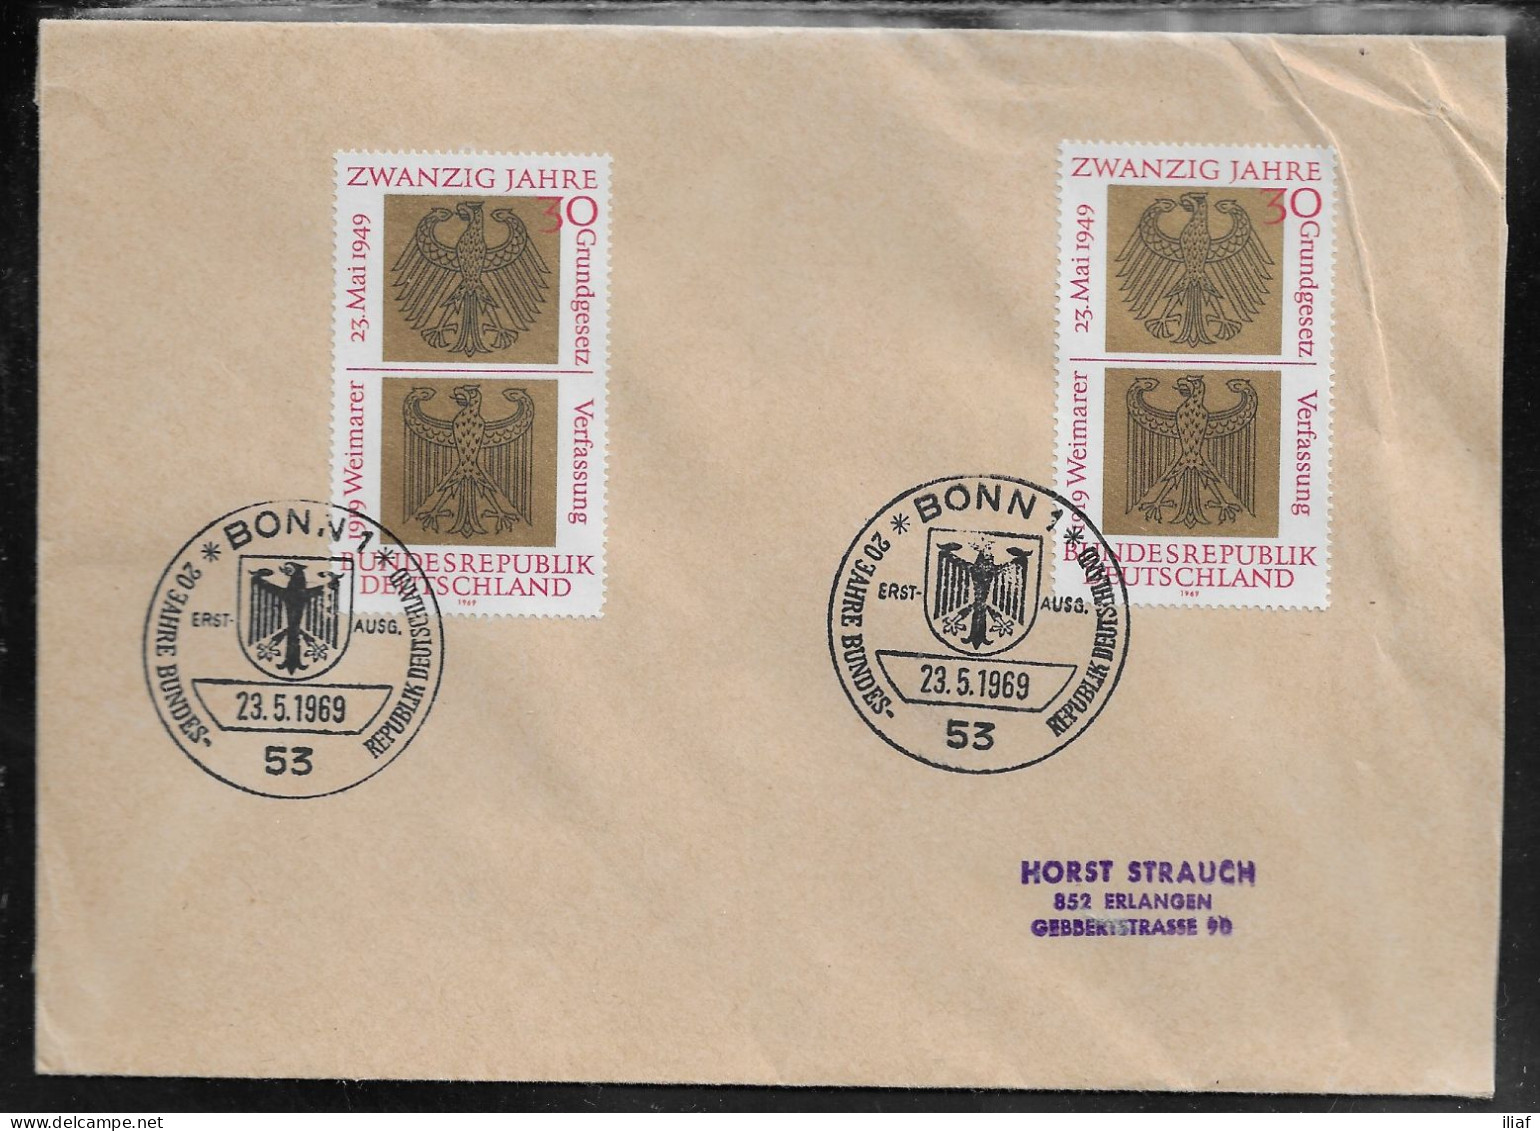 Germany. FDC Sc. 998.   Heraldic Eagles Of Federal And Weimar Republics.  FDC Cancellation on Plain Envelope. - 1961-1970